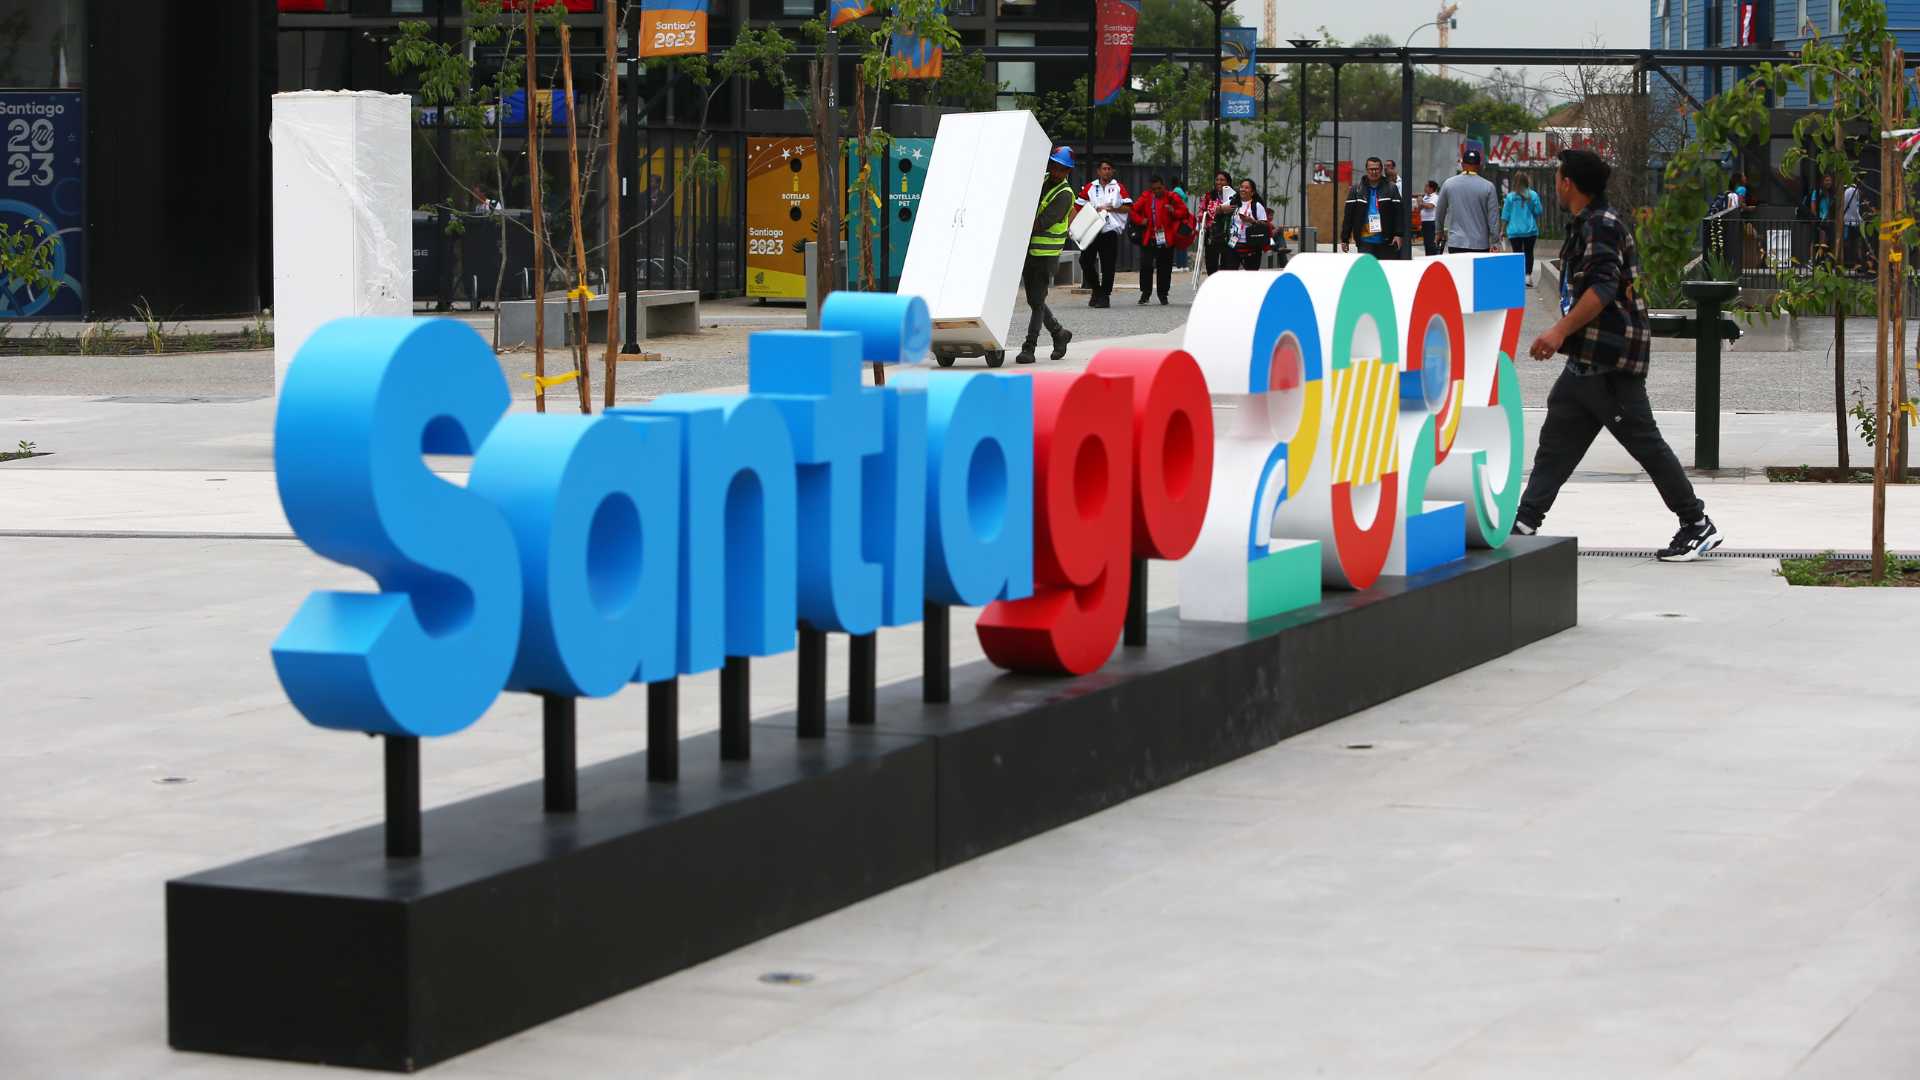 October 21st Program: Santiago 2023's first medalists to be awarded this saturday